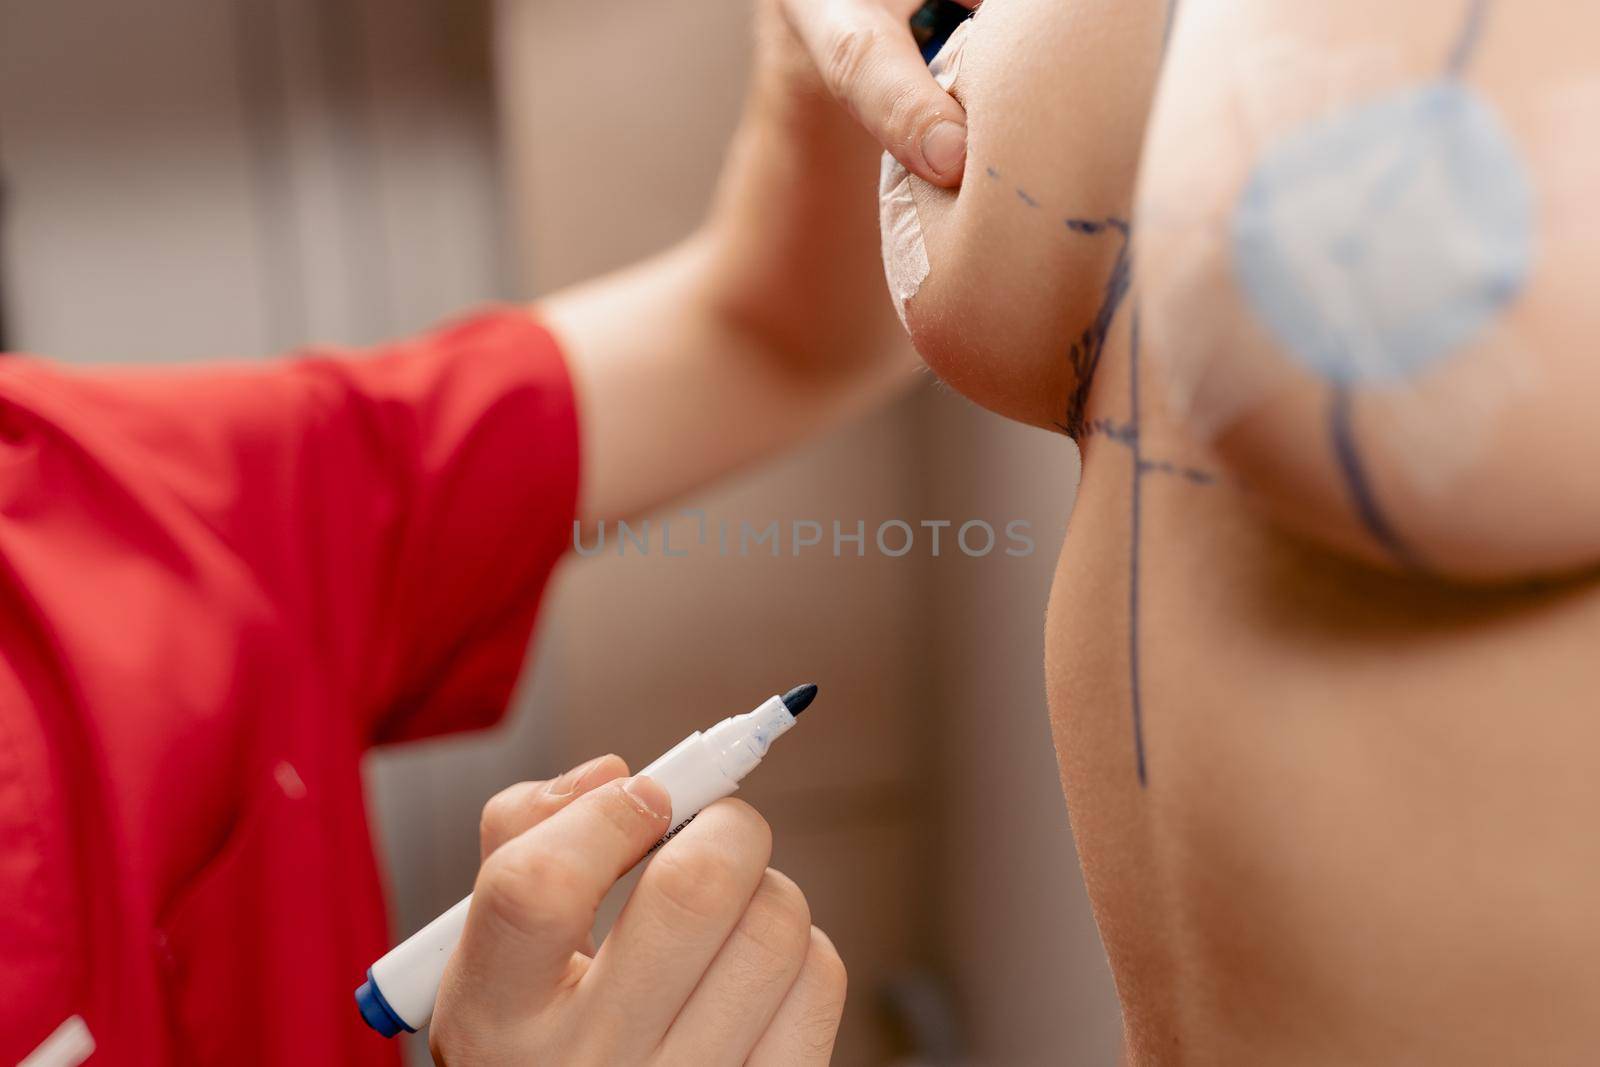 Drawing a marking line on the chest of a young girl. Breast augmentation surgery markup